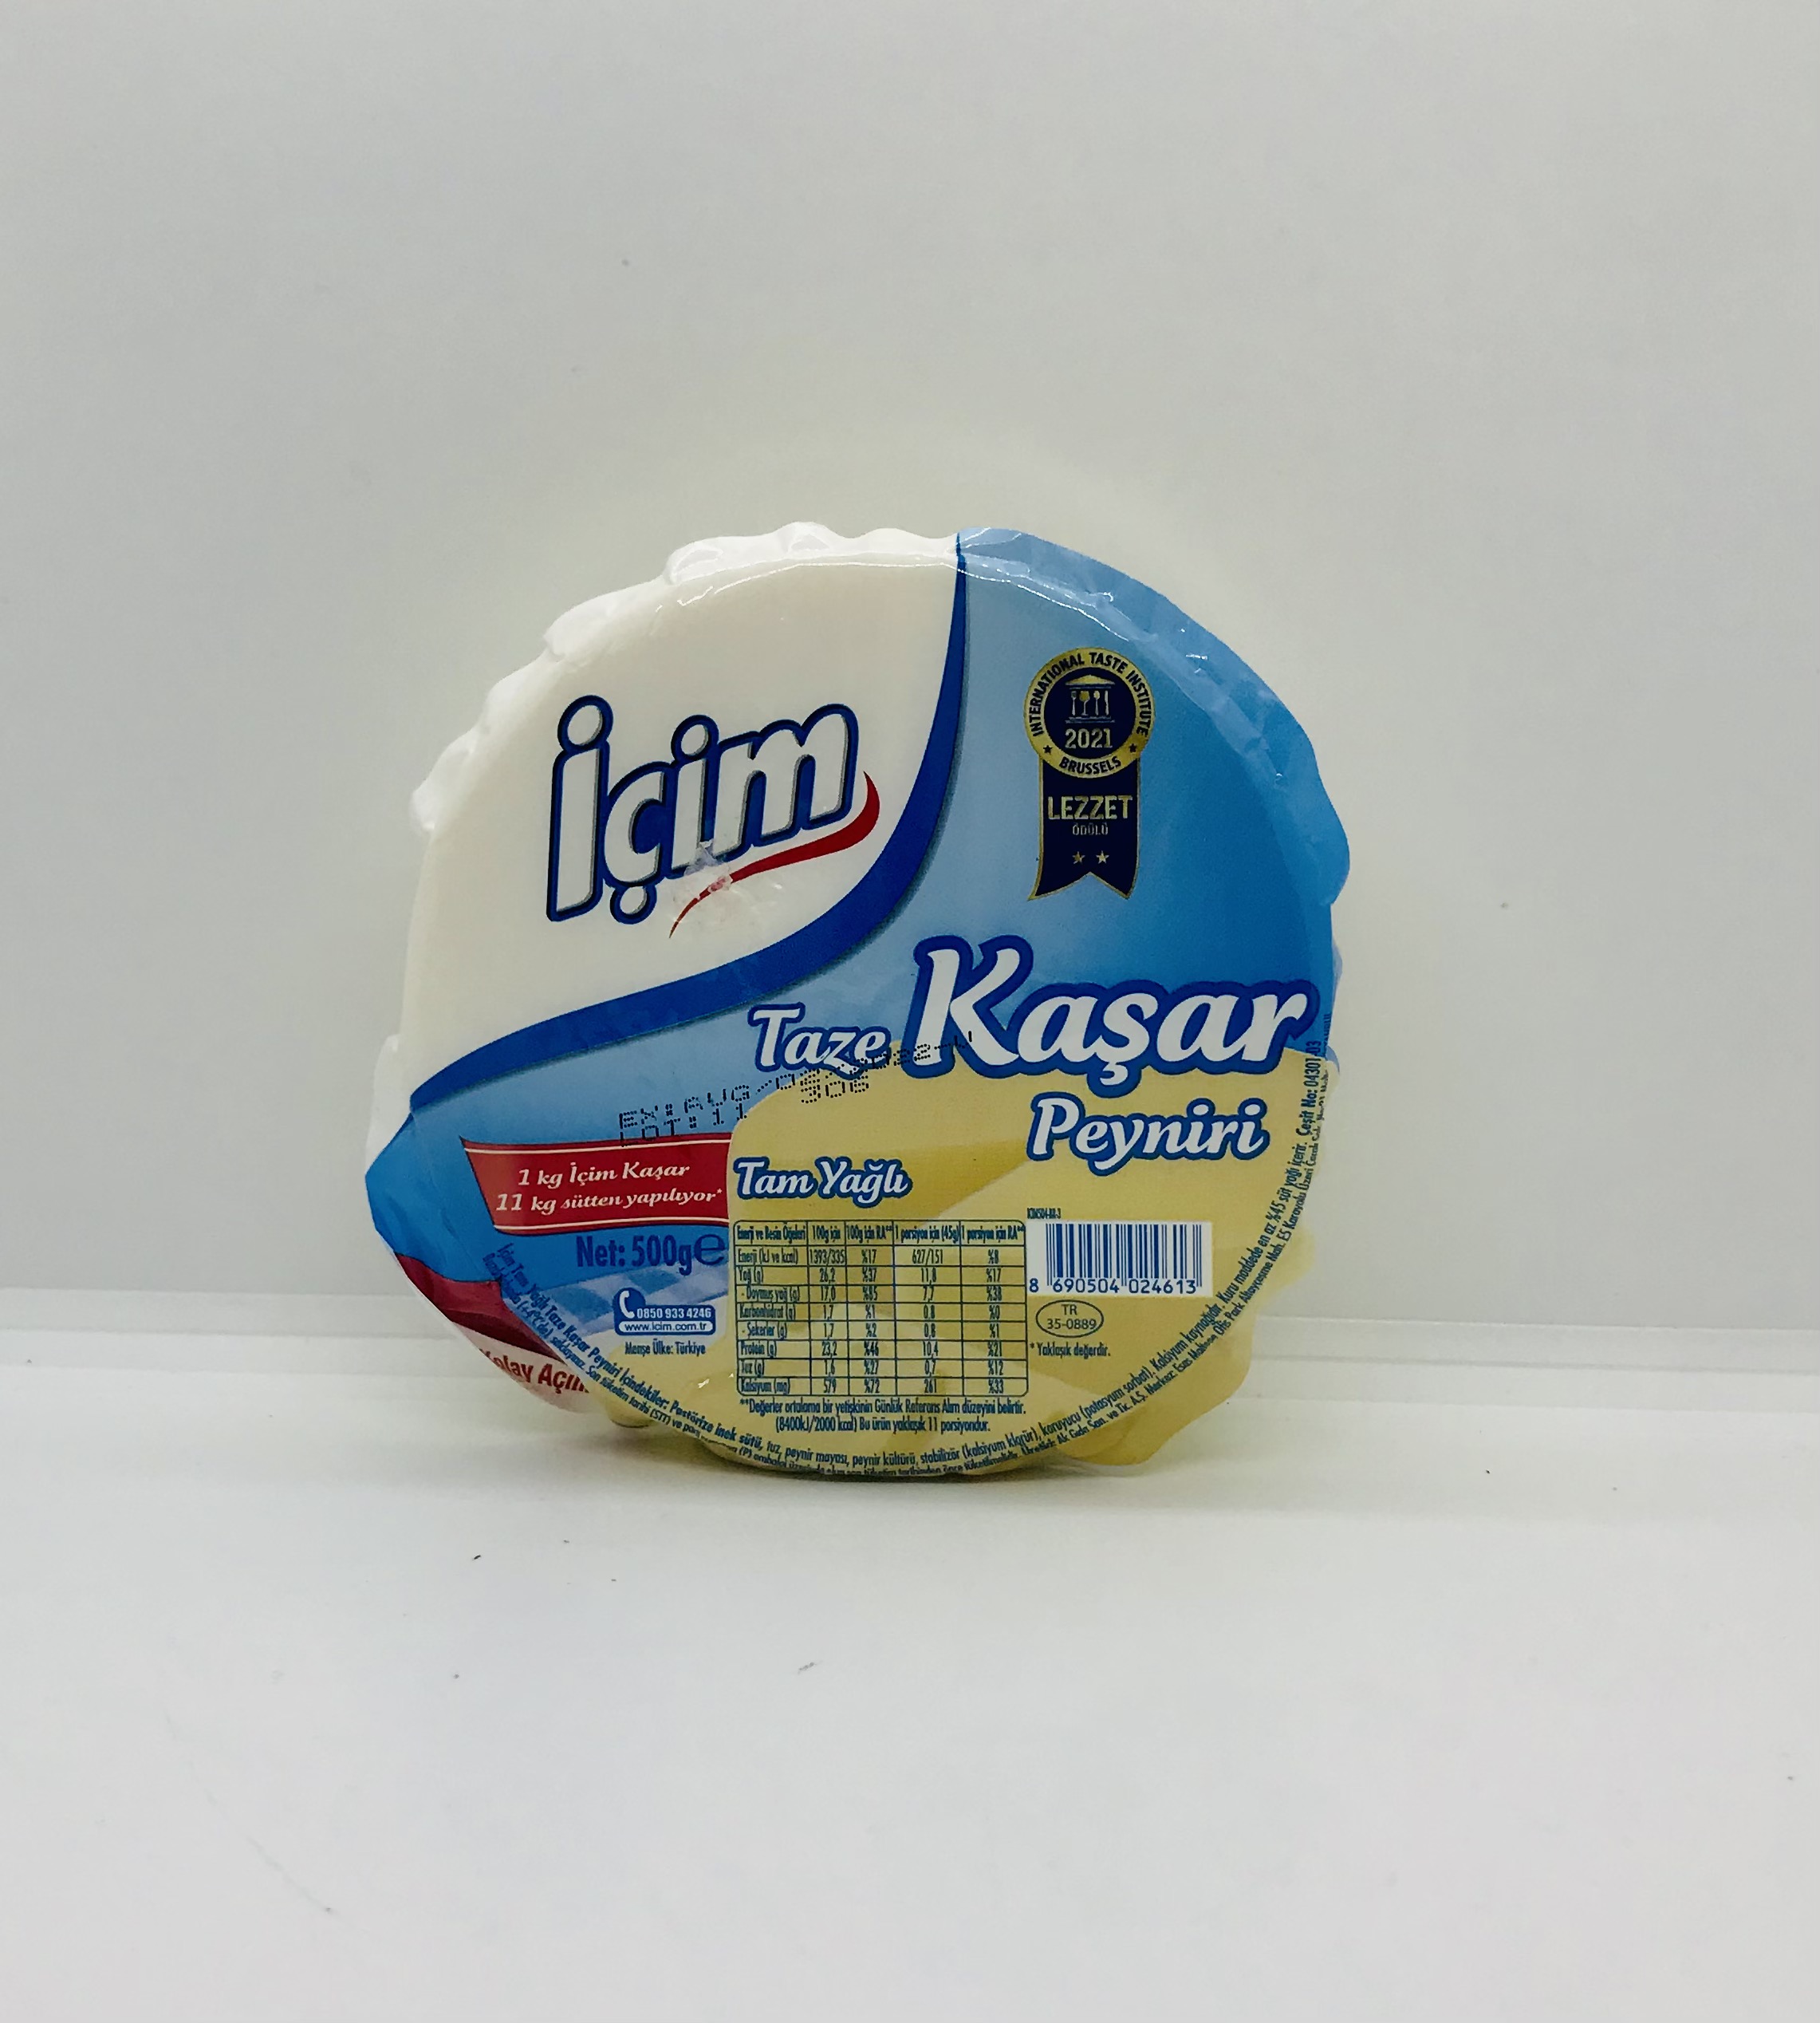 Produce Kashkaval 500g. Gala Icim and Grocery Apple -